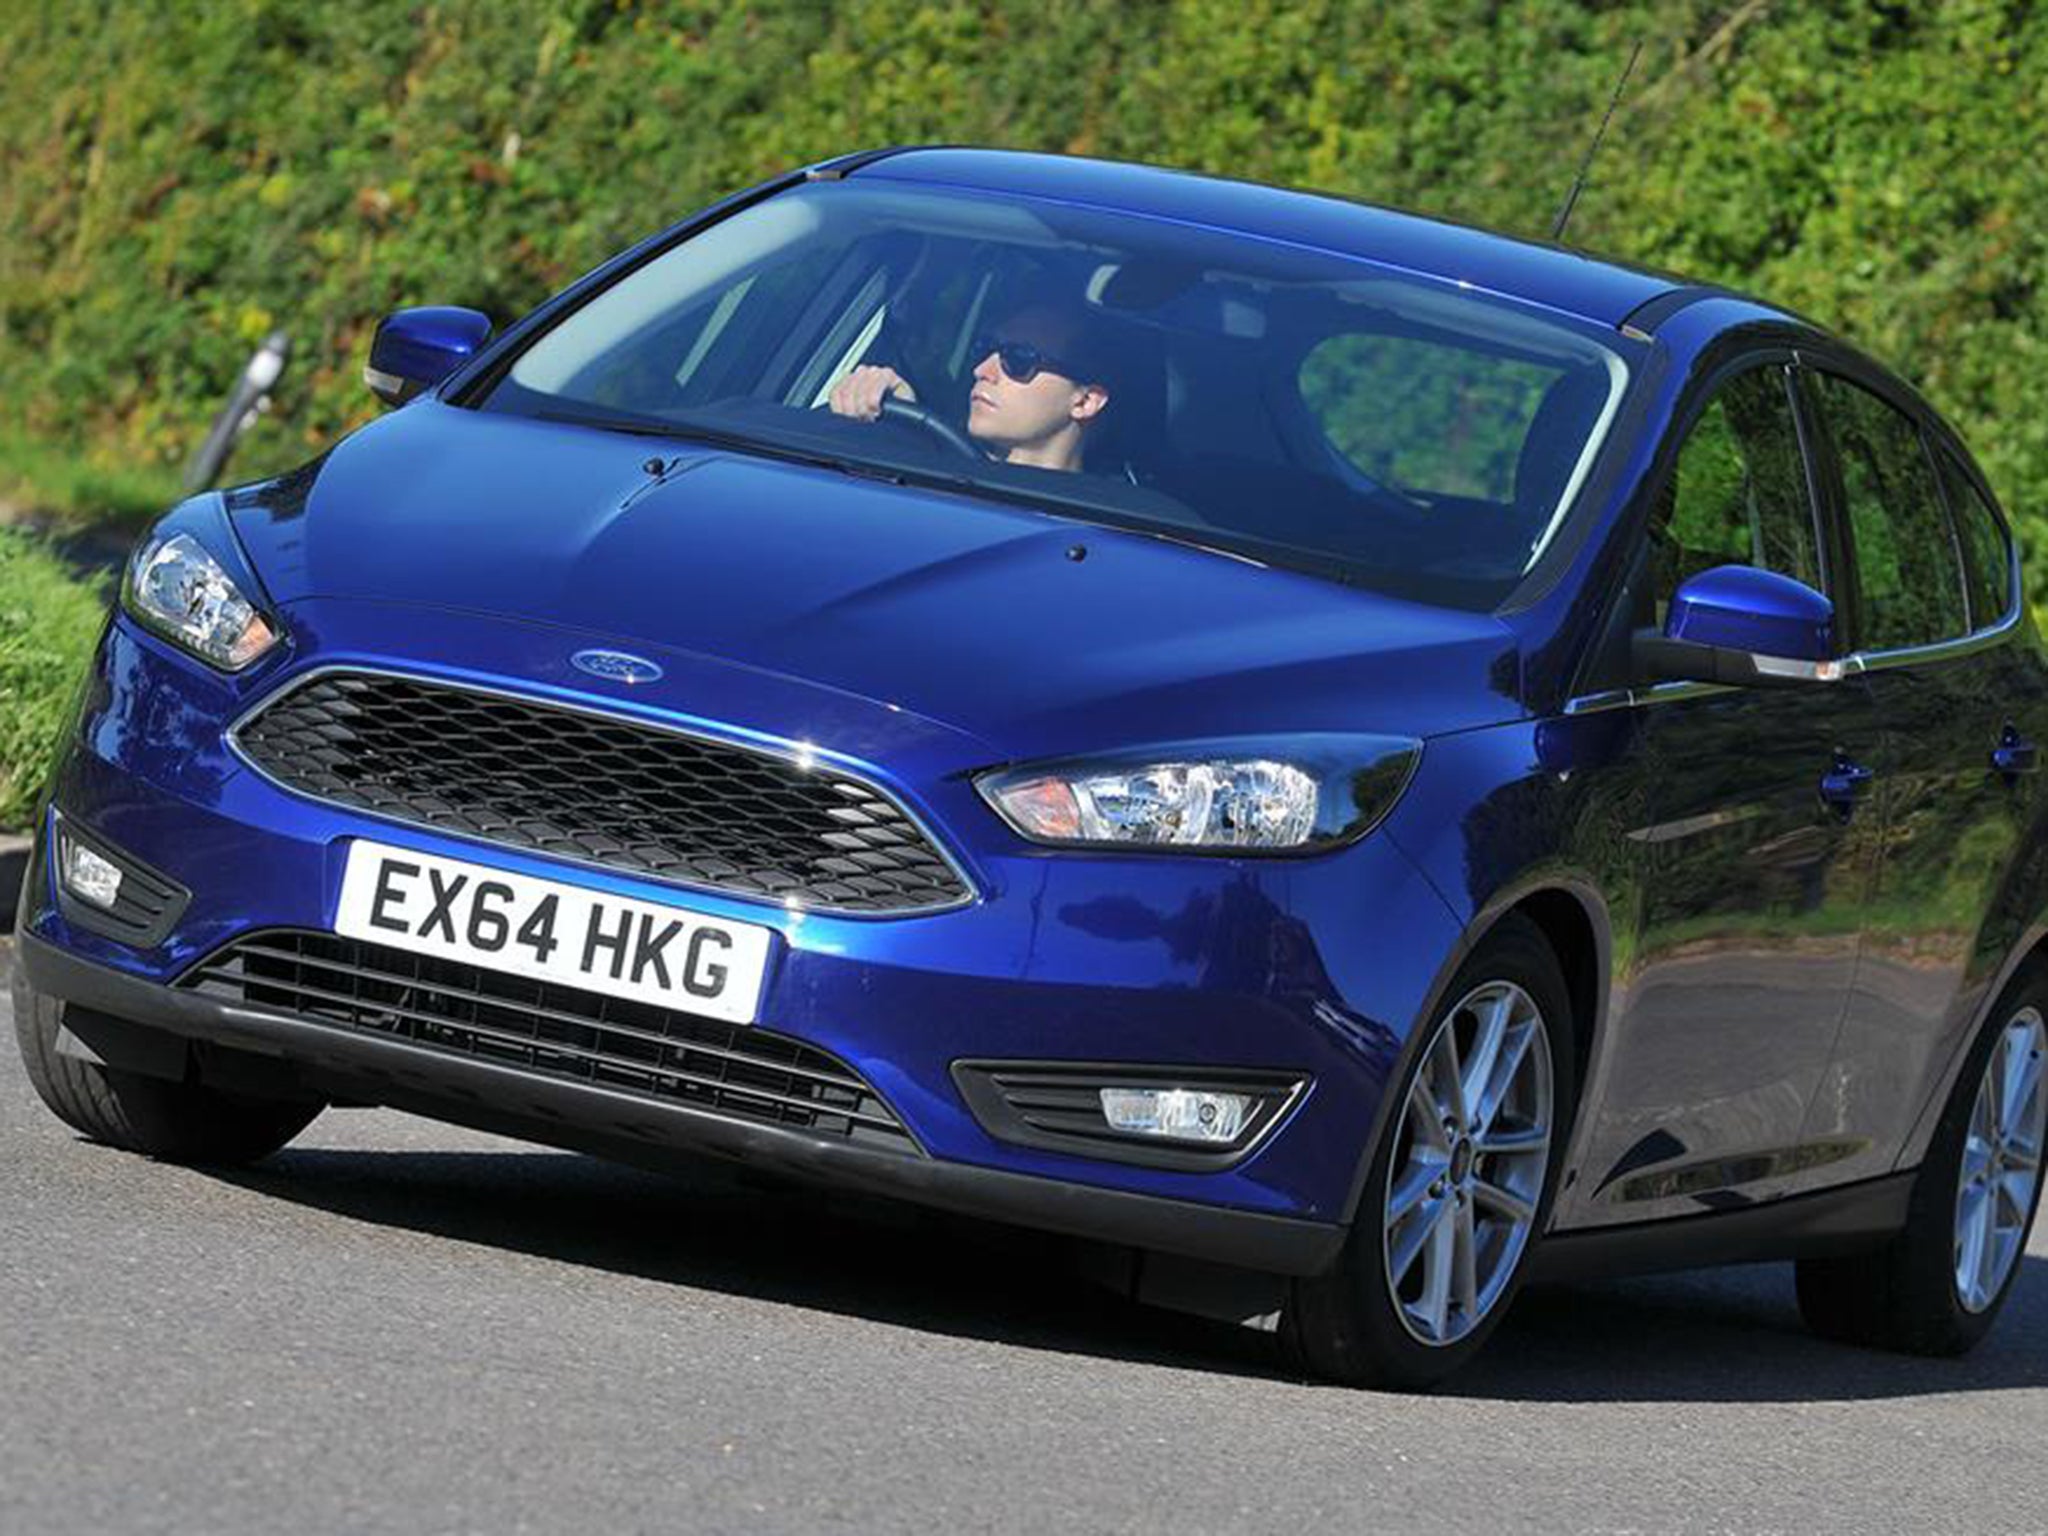 The Ford Focus is the most refined unit here